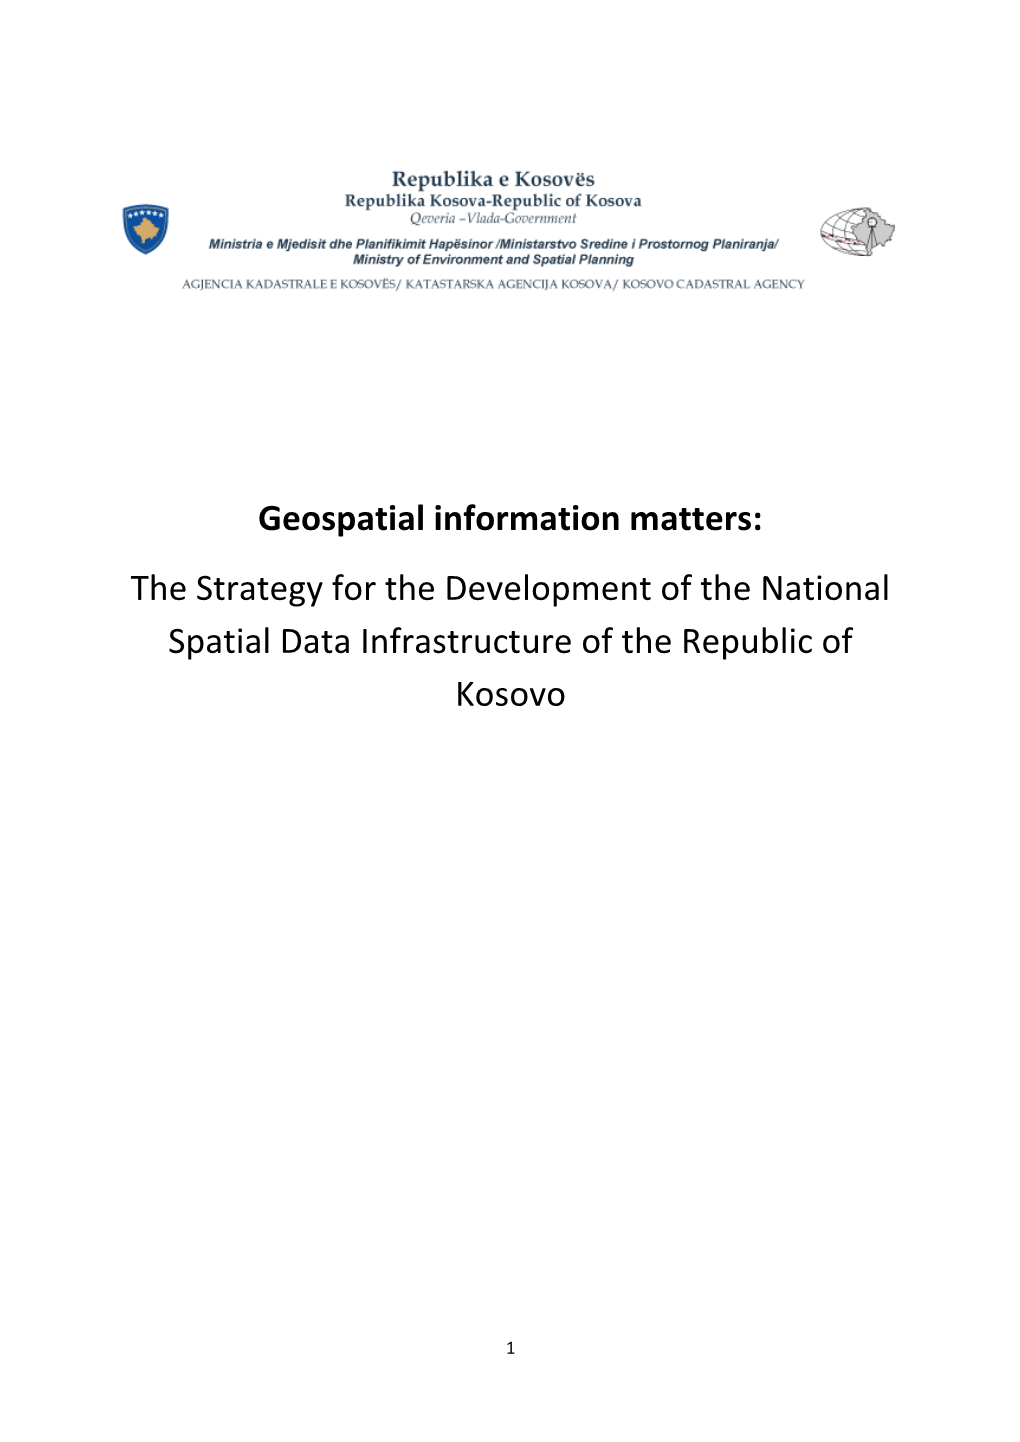 The Strategy for the Development of the National Spatial Data Infrastructure of the Republic of Kosovo